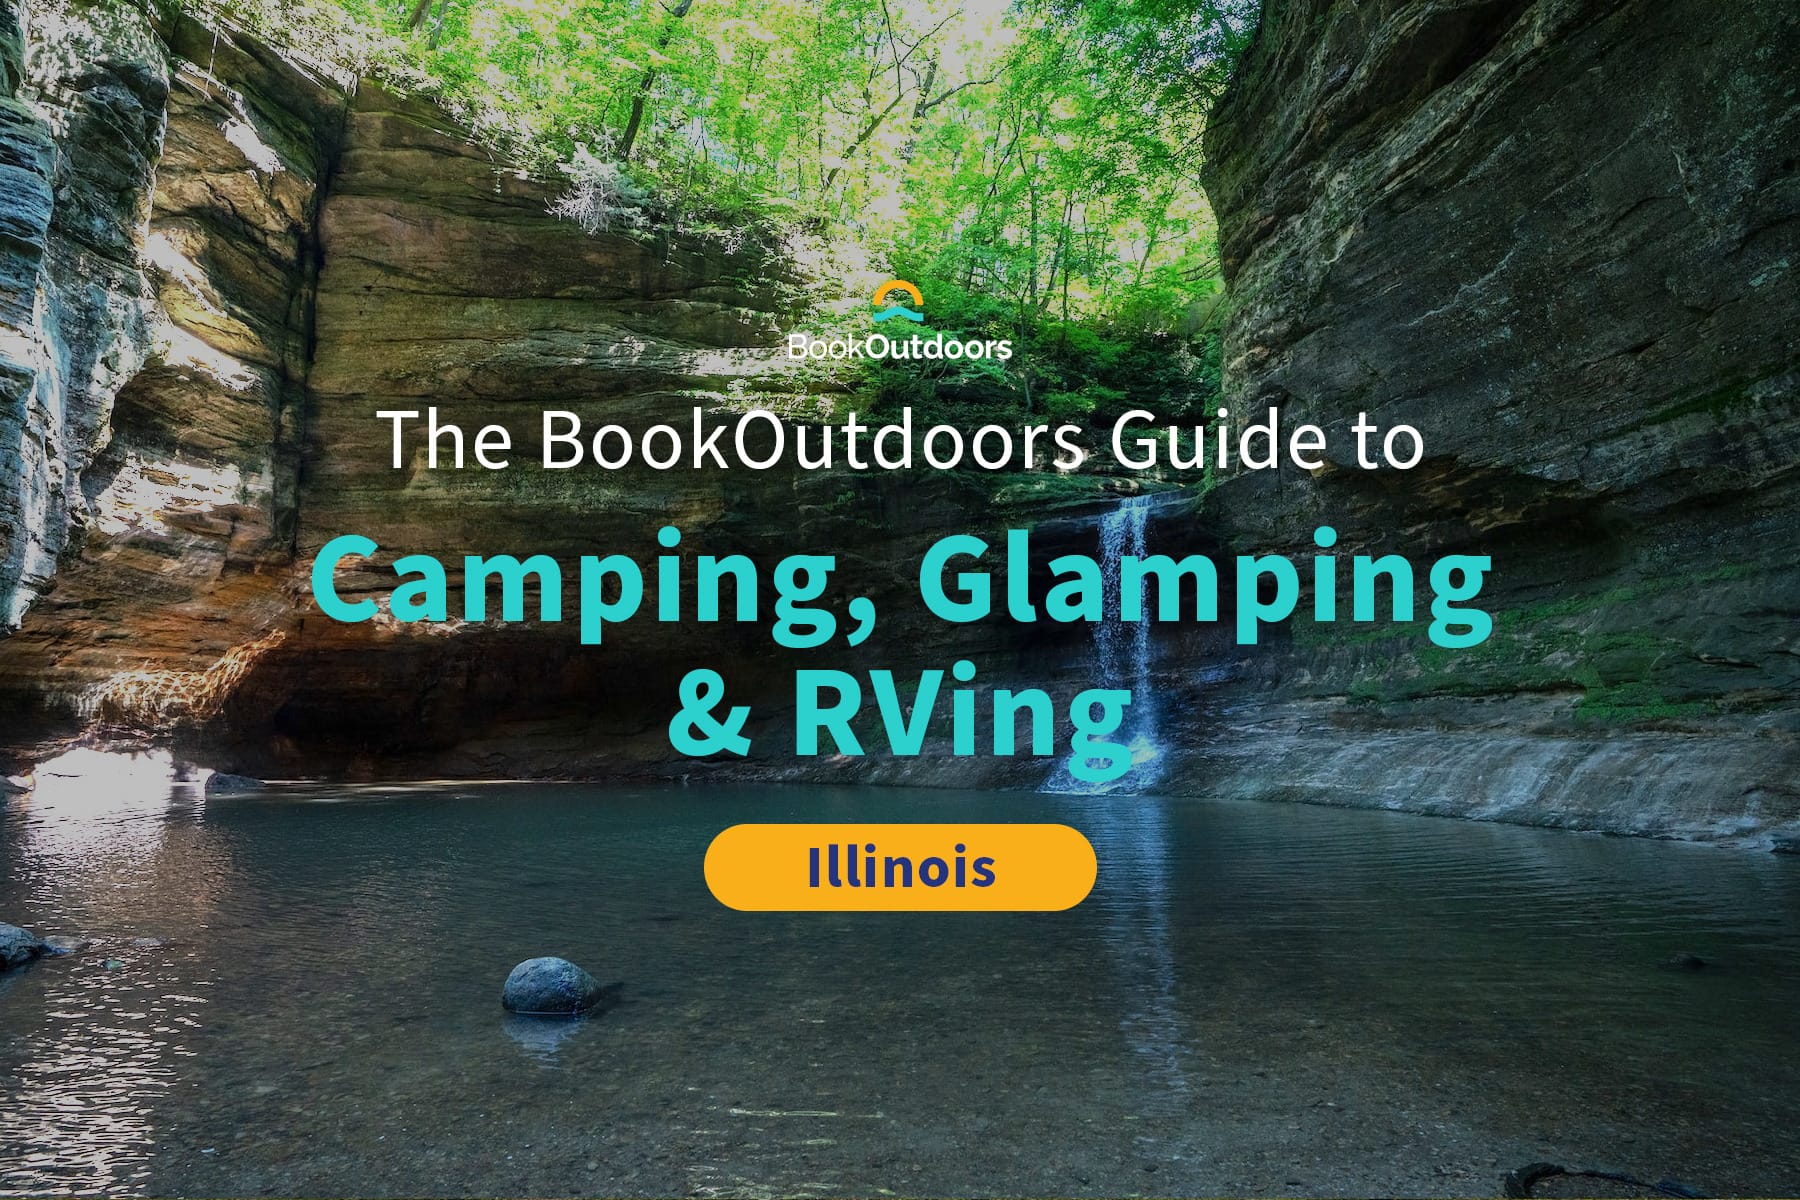 Image of Starved Rock State Park to convey the best camping in Illinois